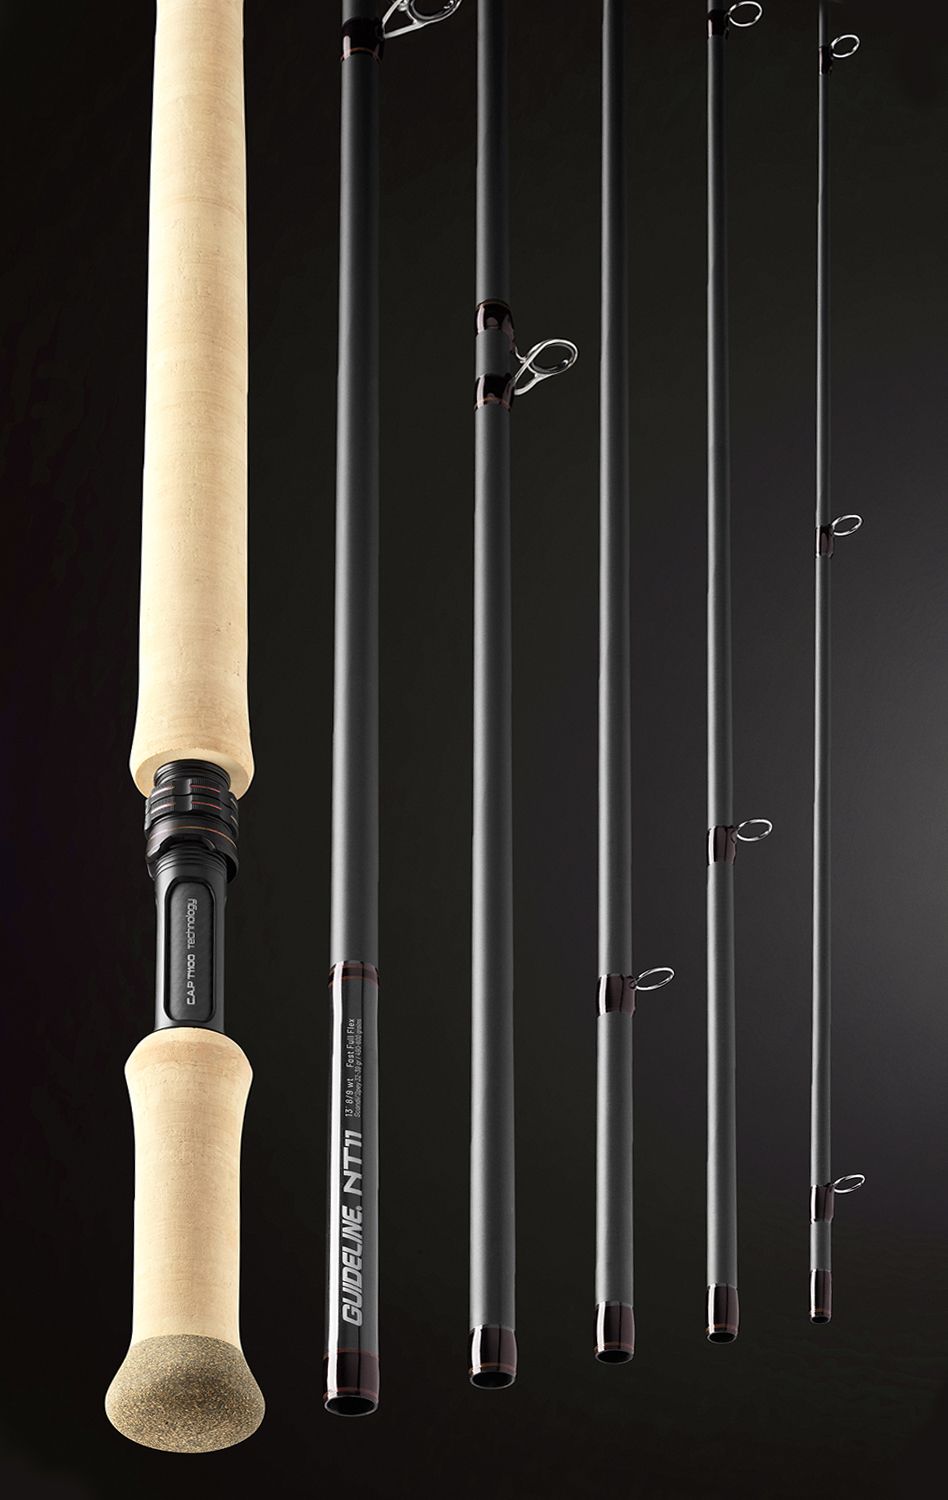 GUIDELINE NT11 FAST FULL FLEX 6PCE DH FLY RODS - NEW '24